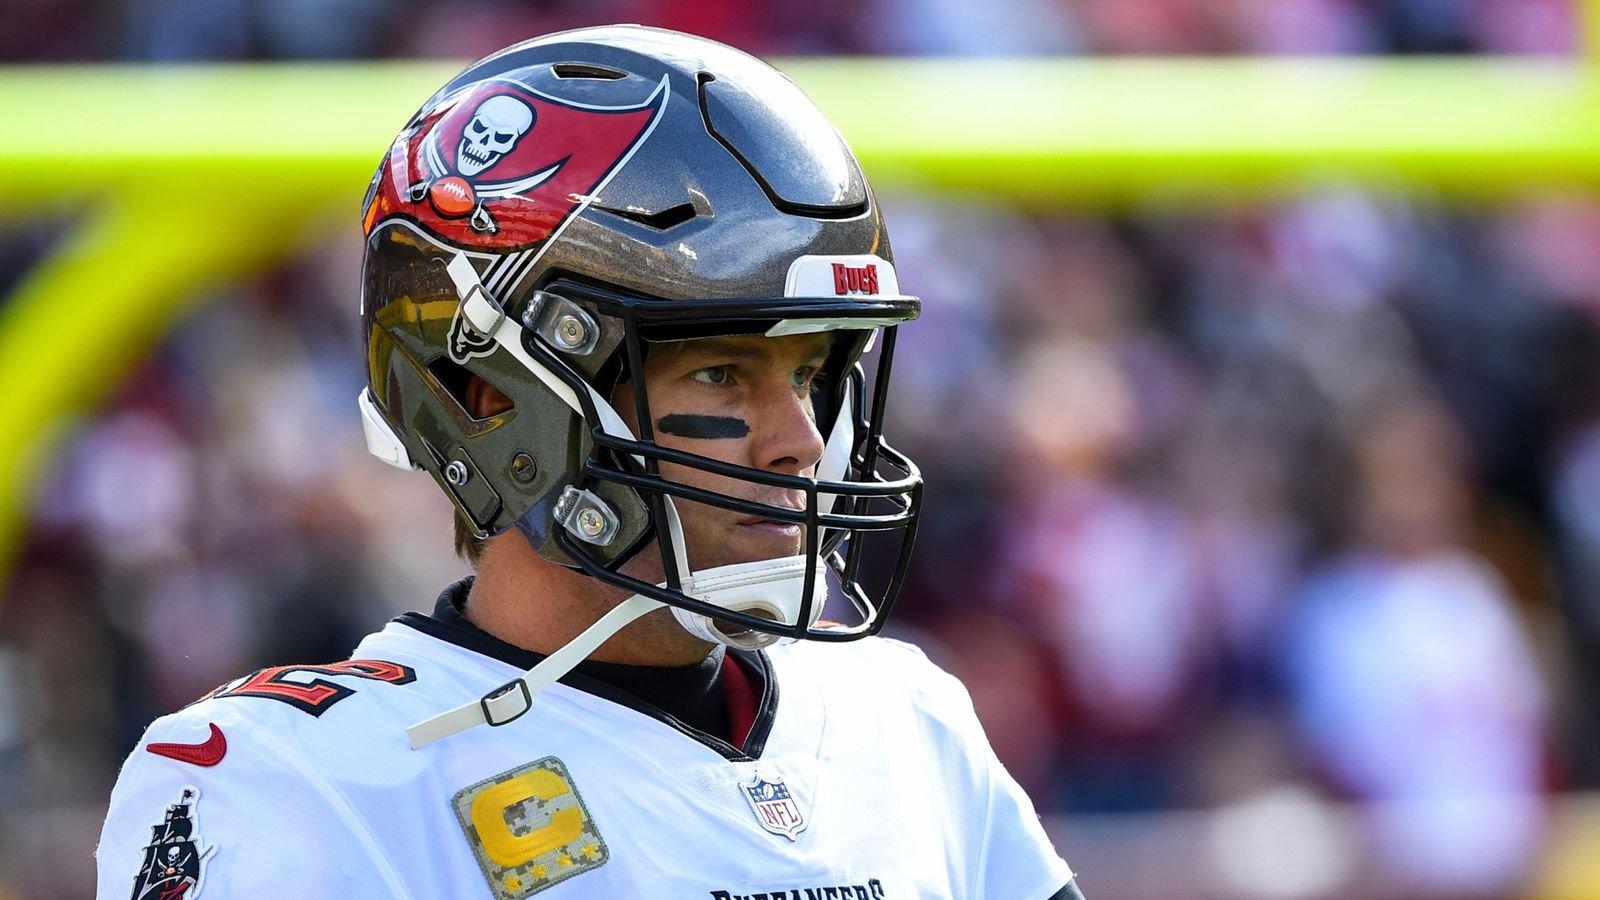 Chiefs vs. Bucs Week 4 SNF Betting: Can Brady Win Back-to-Back Games Against Mahomes? cover